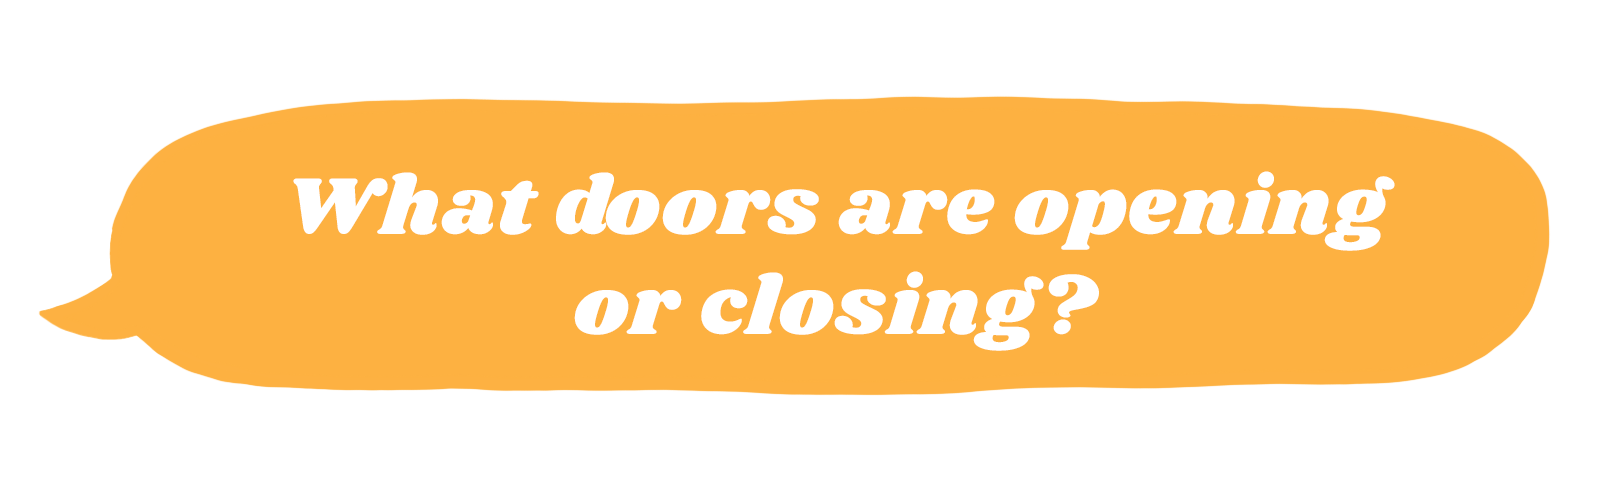 What doors are opening or closing?